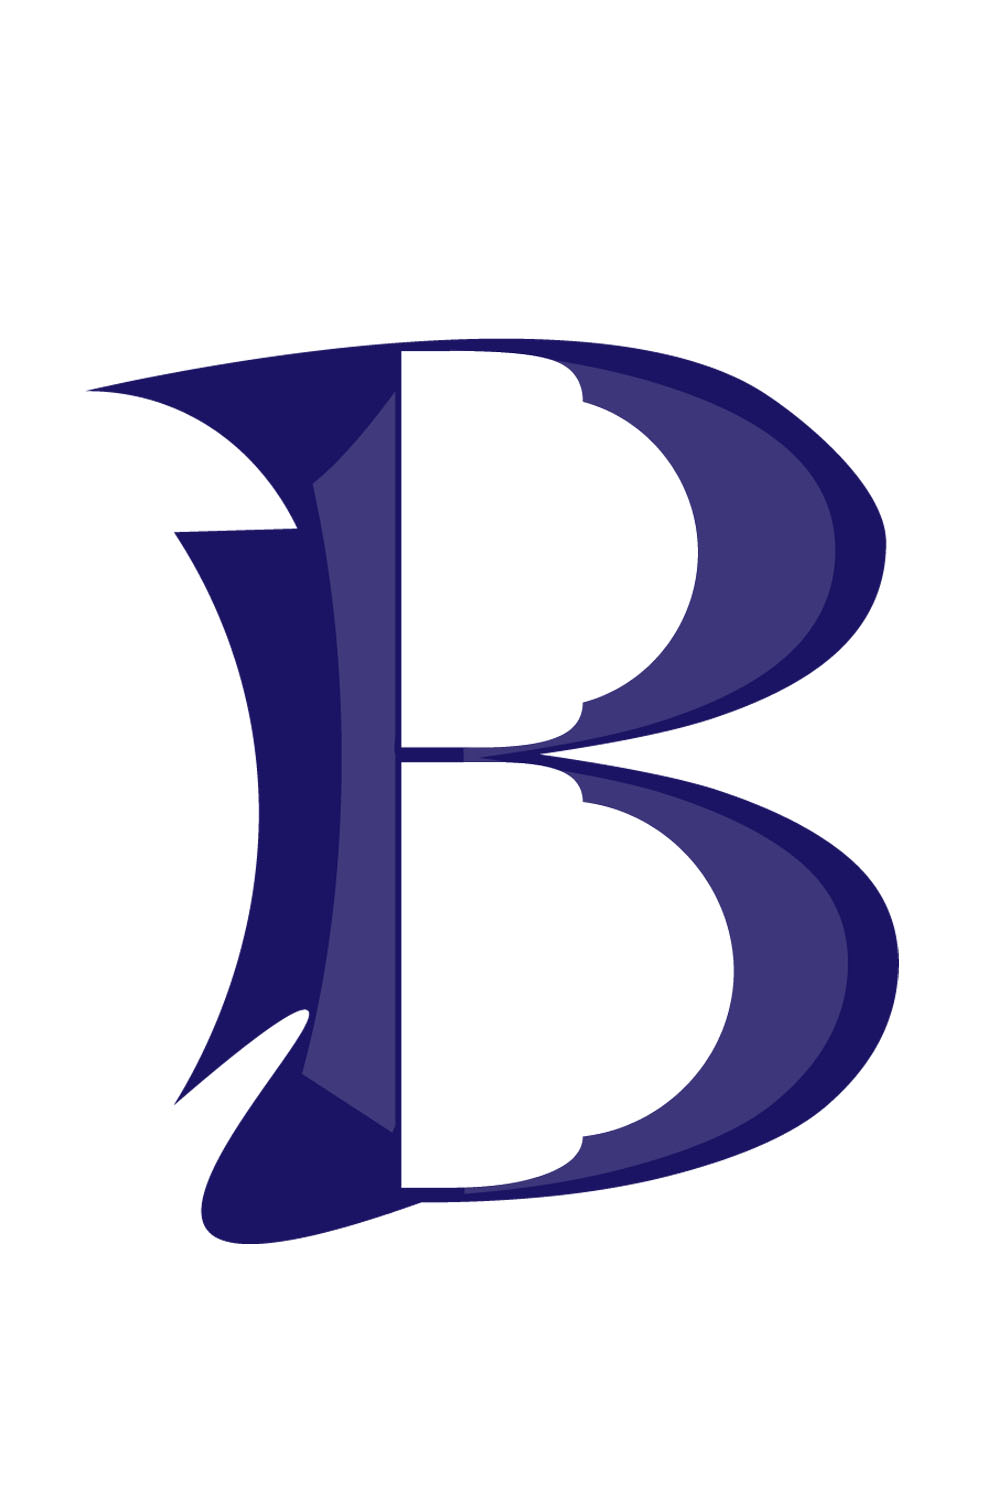 A distinctive and exclusive logo, the letter B pinterest preview image.